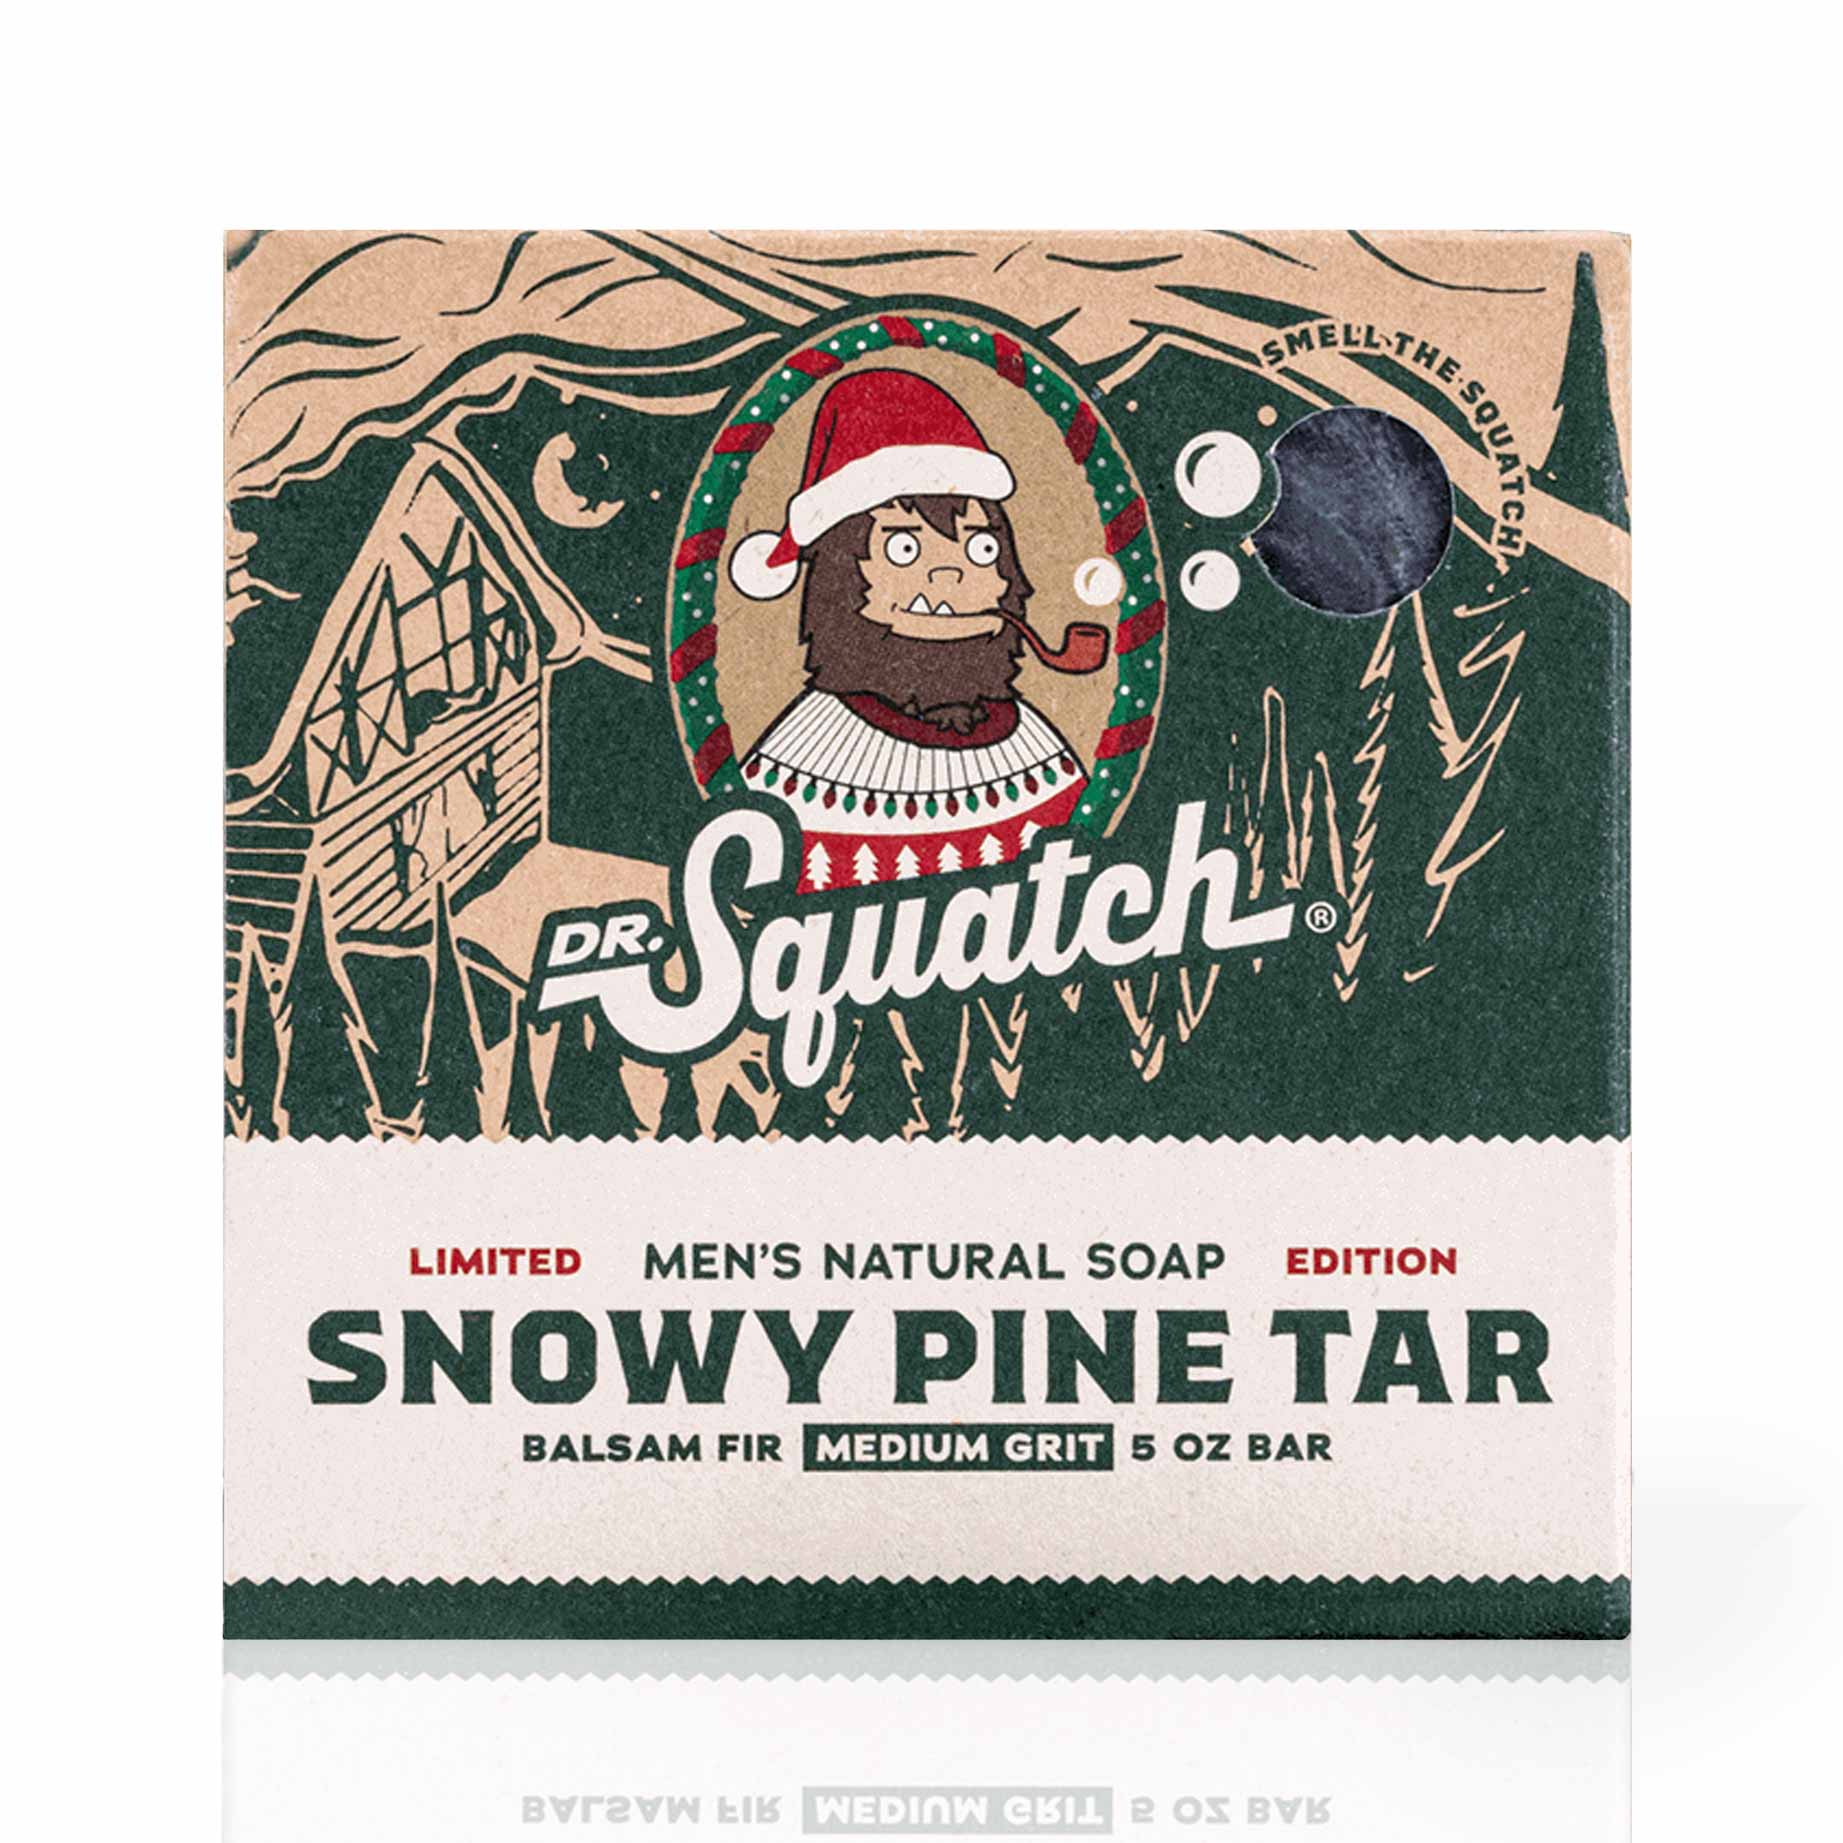 Dr. Squatch - North Pole Limited Edition 2-Pack I The Kings of Styling